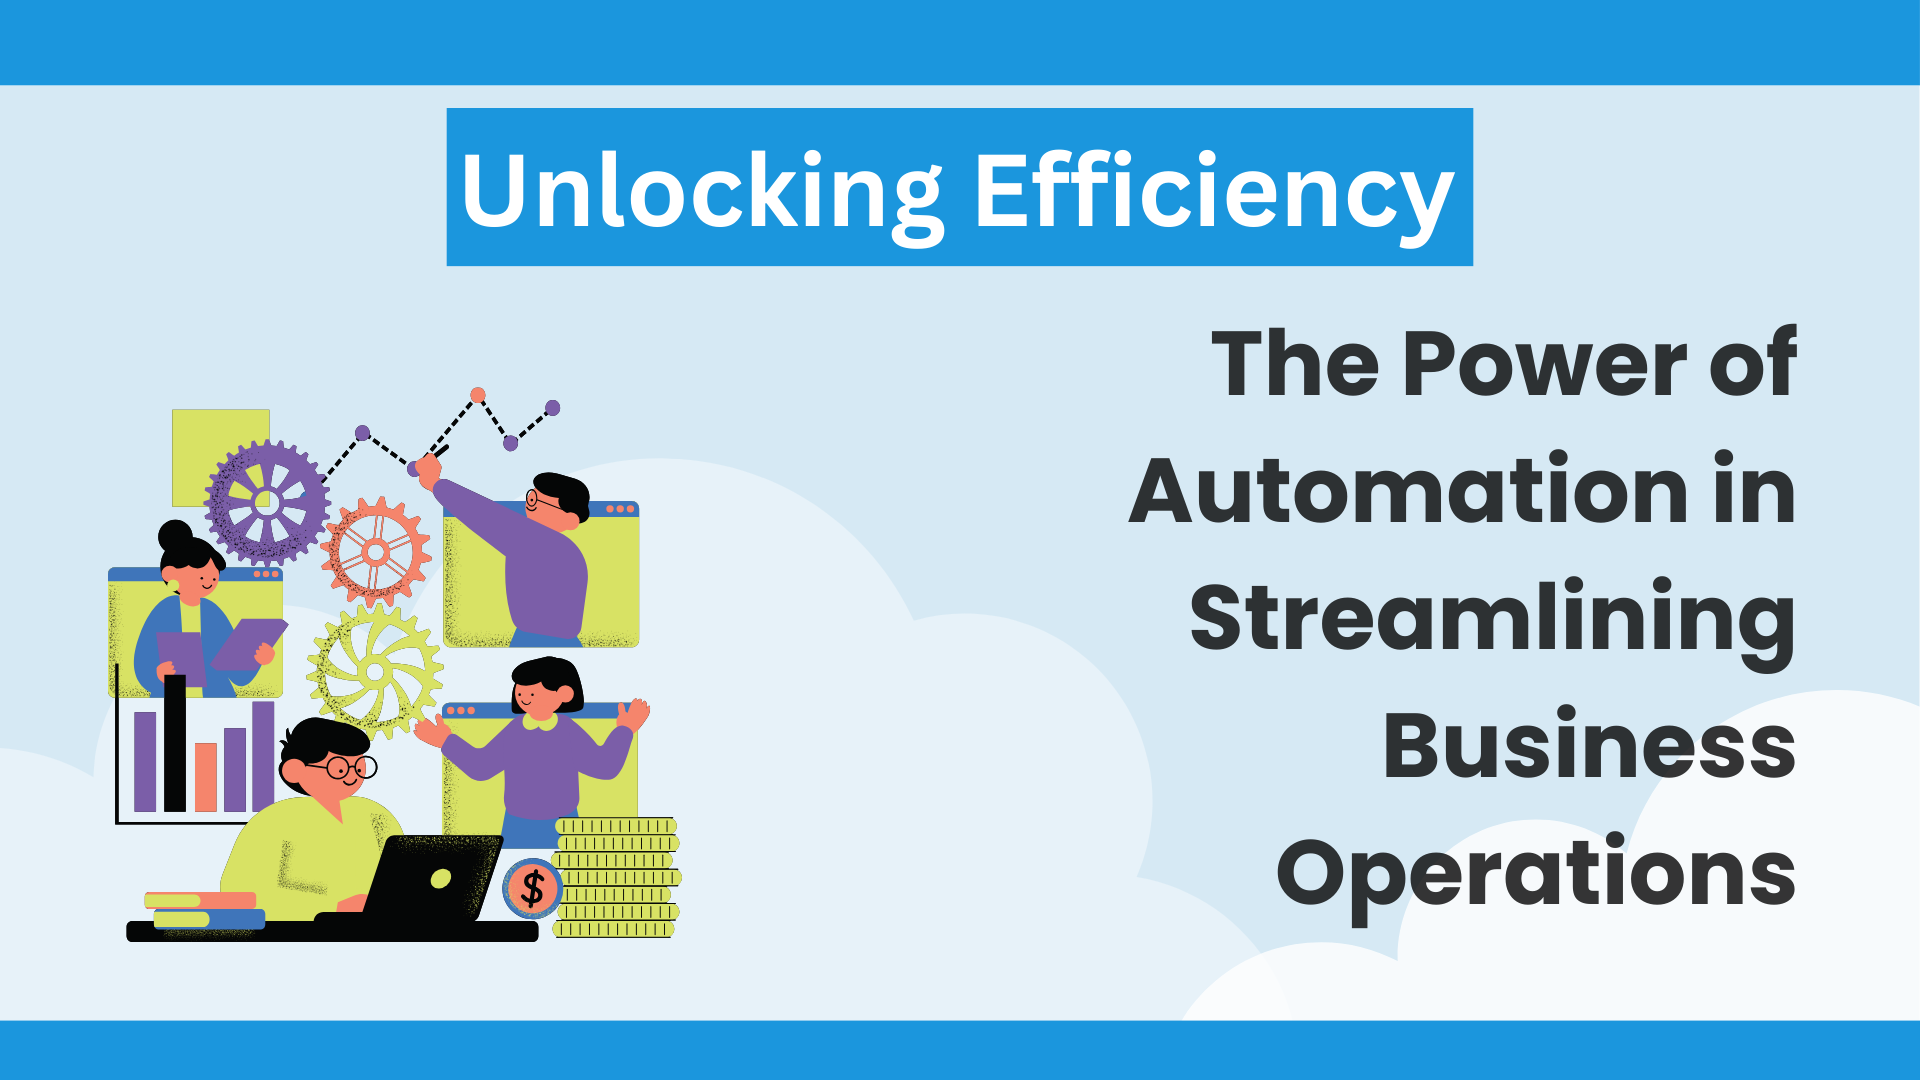 Unlocking Efficiency: The Power of Automation in Streamlining Business Operations